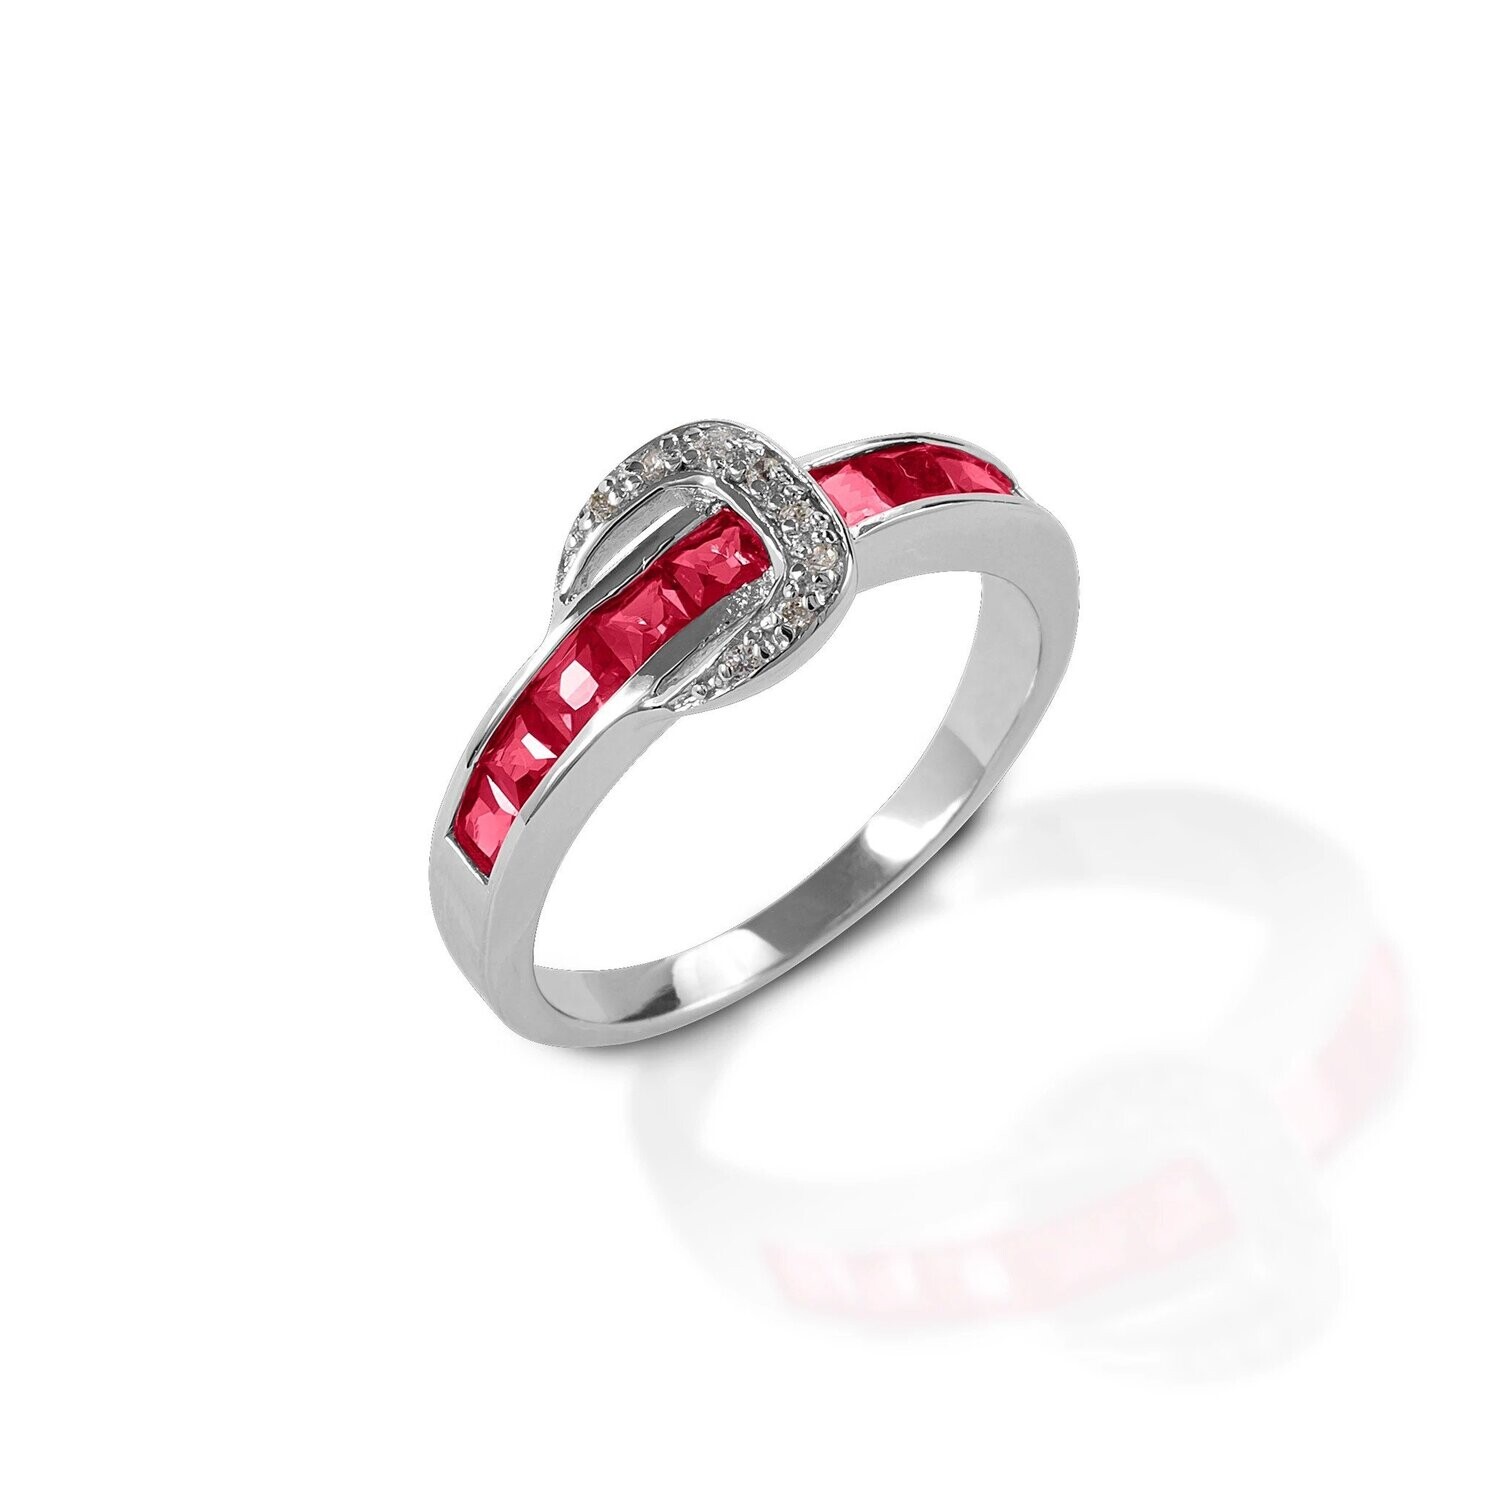 Kelly Herd 4L-9 SM Red Buckle Ring Sterling Silver Size 9